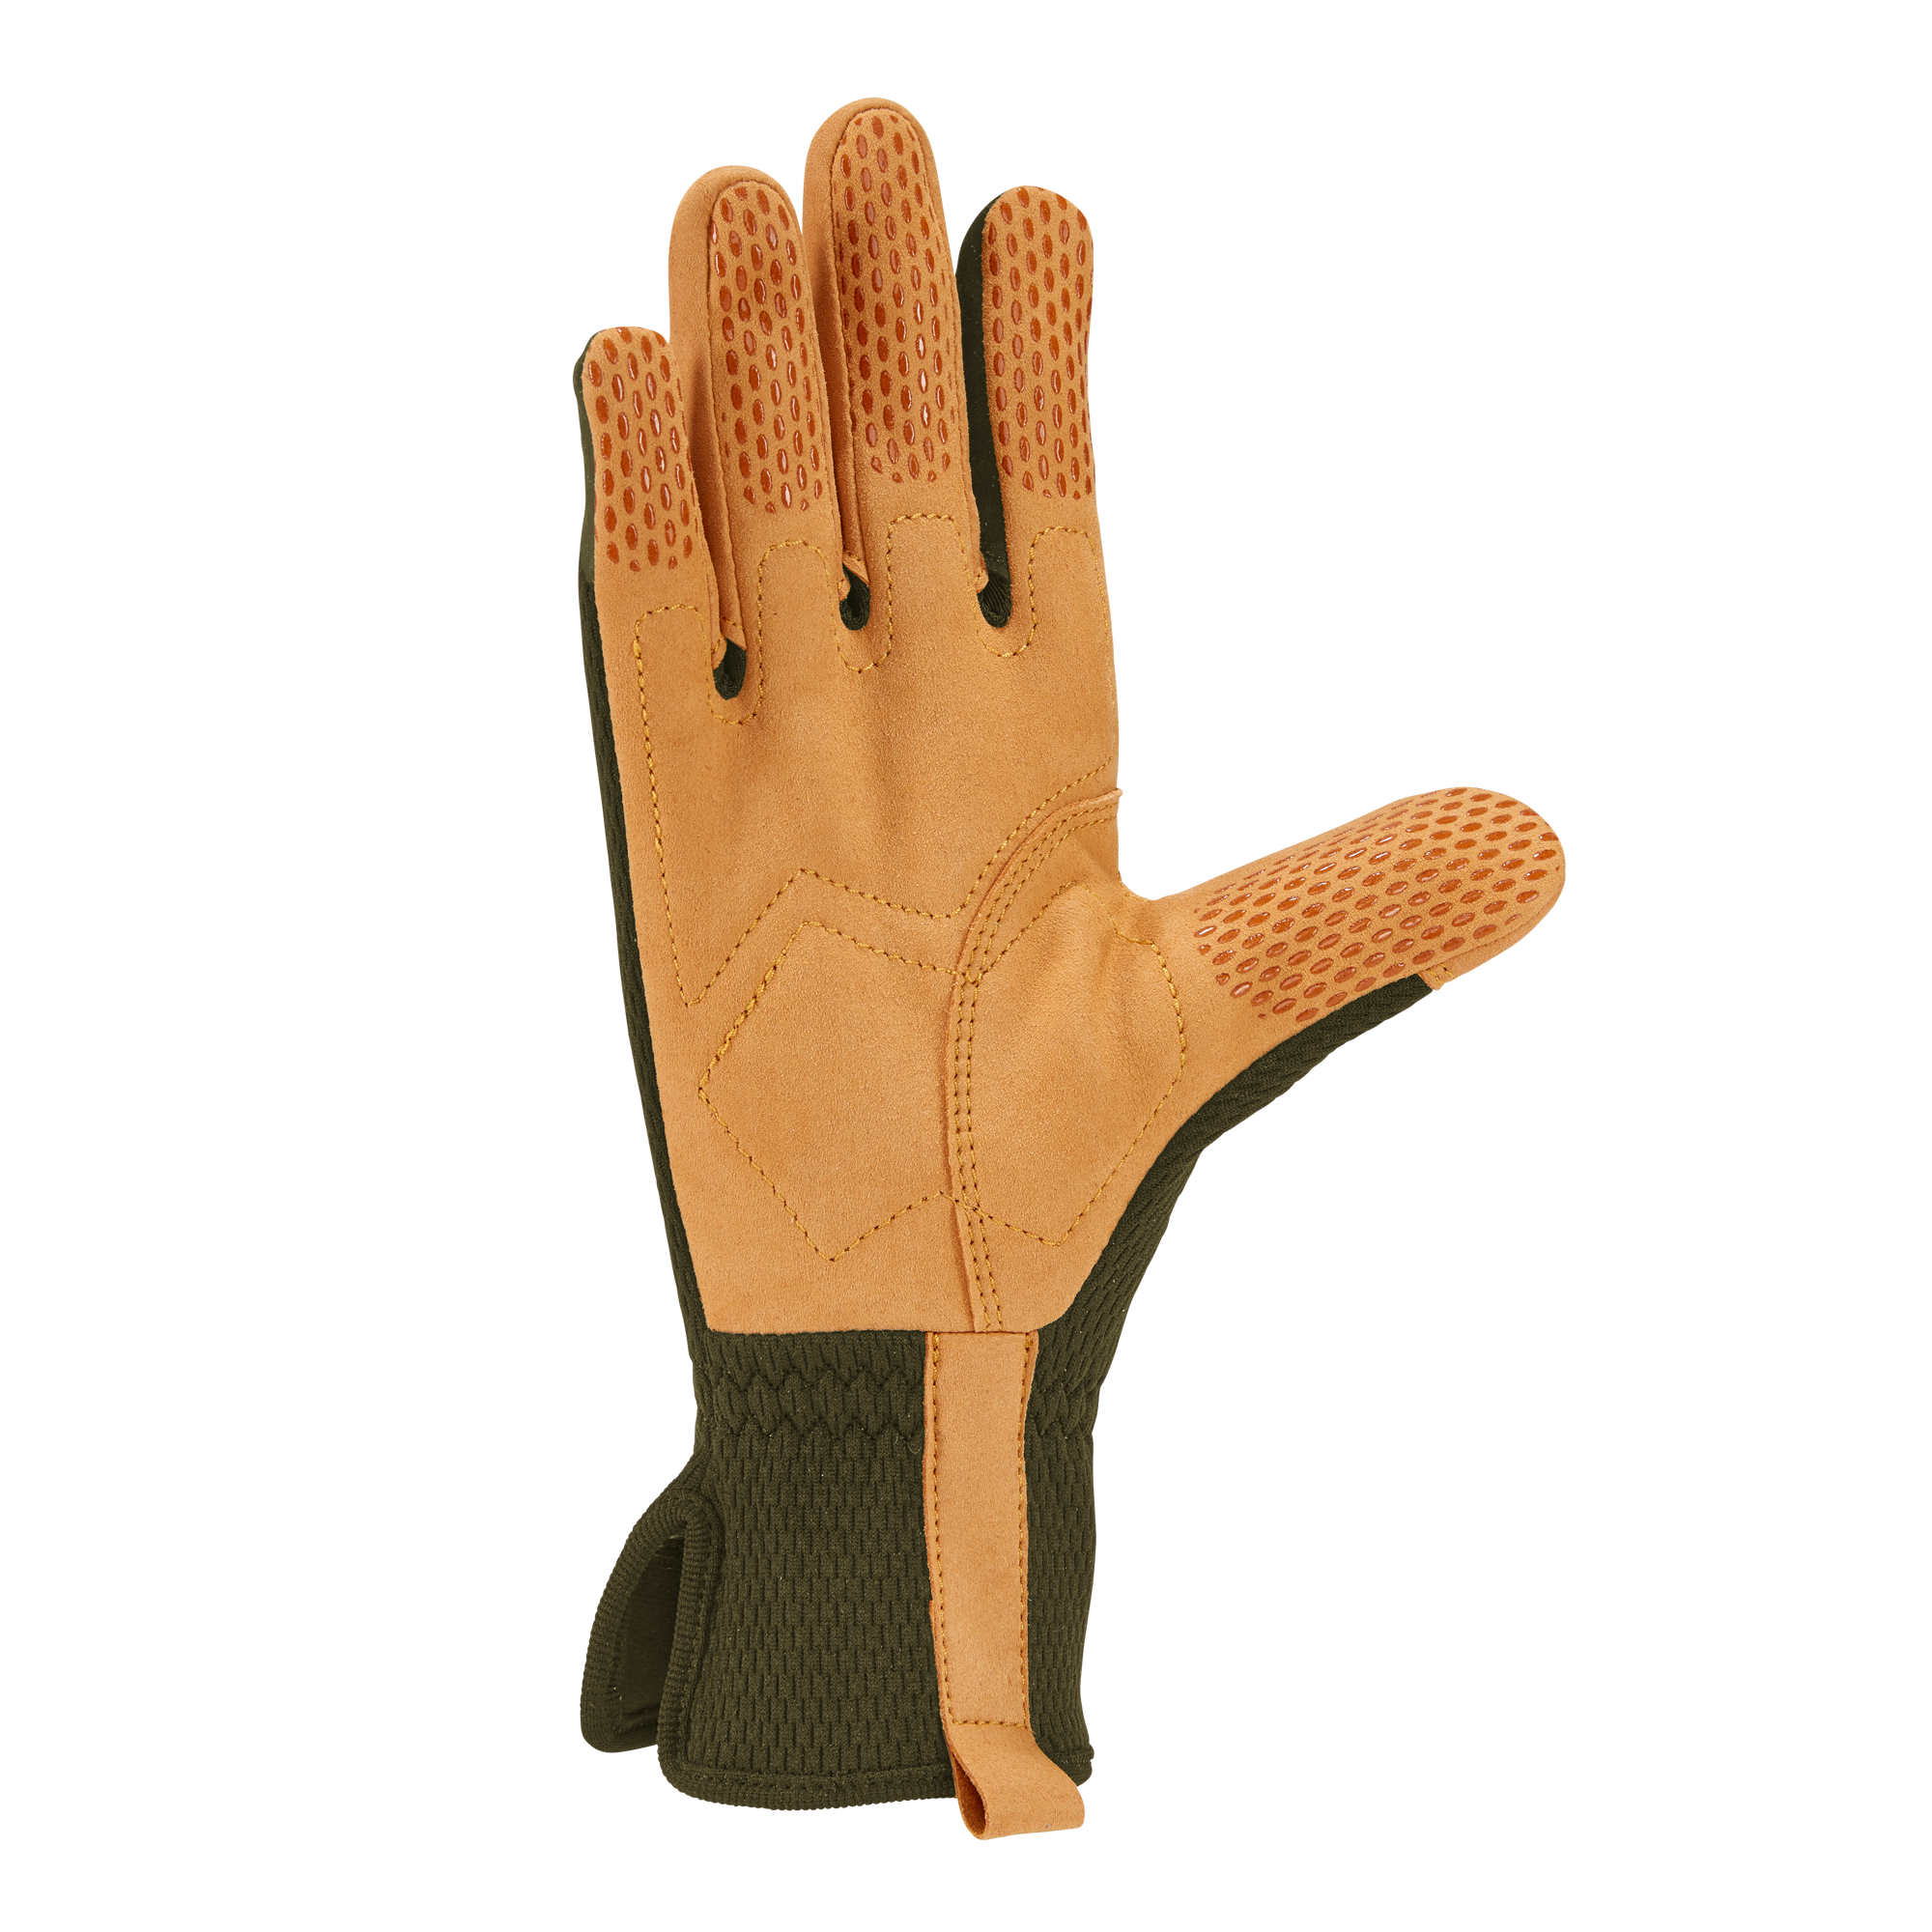 Picture of Carhartt GD0795W Mens HIGH DEXTERITY PADDED PALM TOUCH SENSITIVE LONG CUFF GLOVE